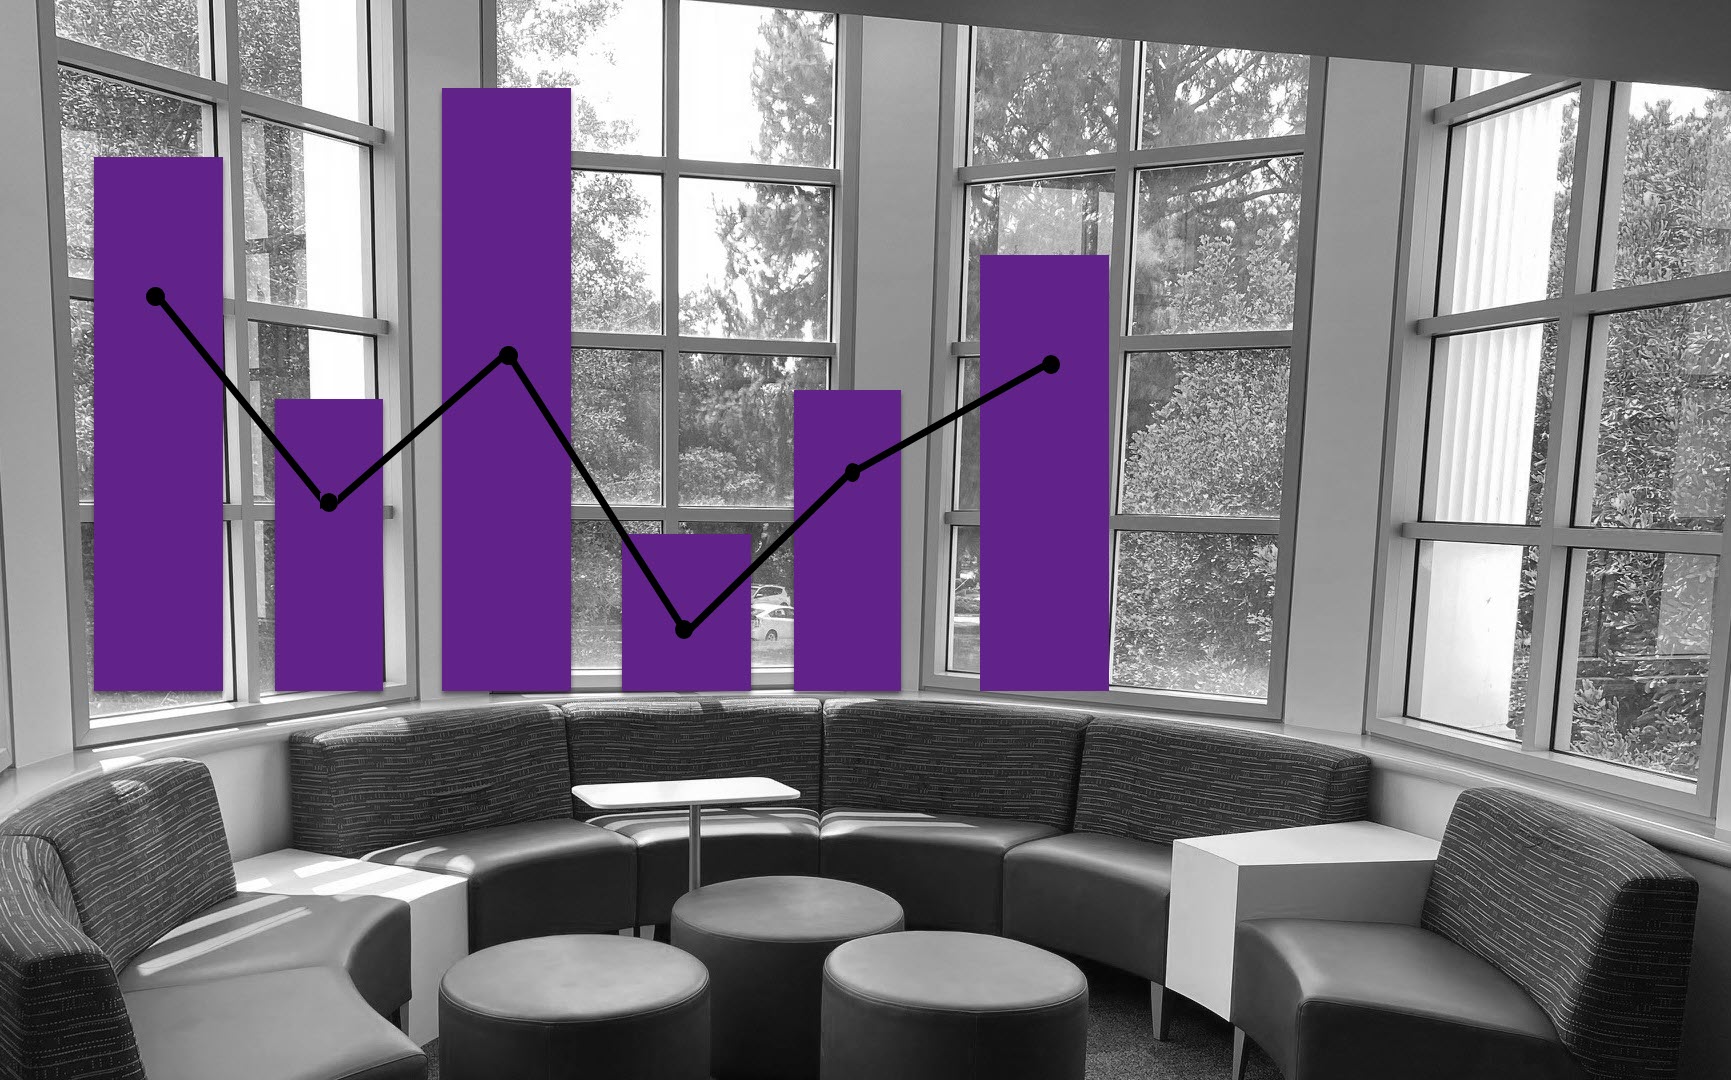 An image of the interior windows of the library overlaid with a data visualization.